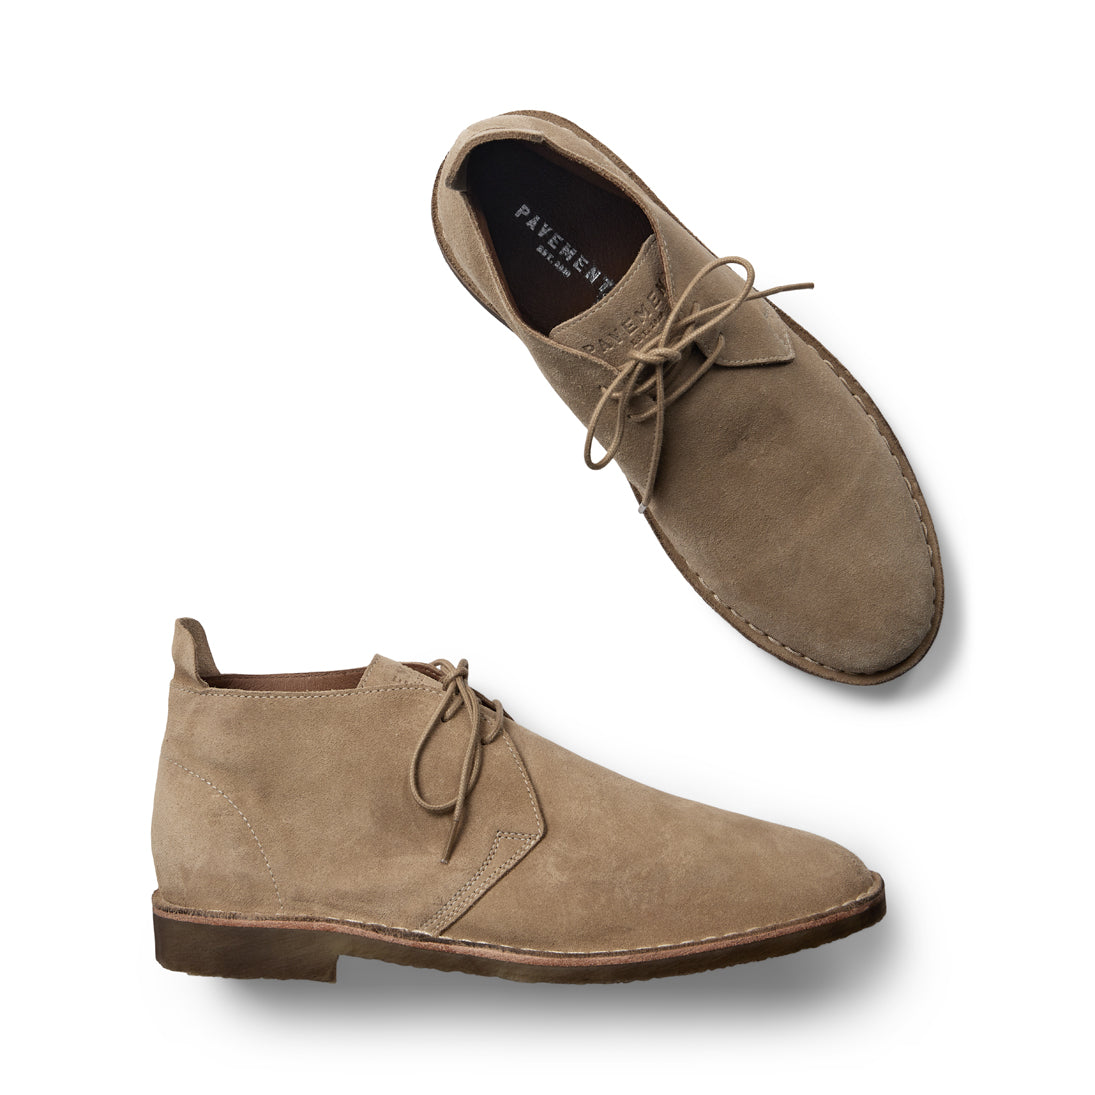 Pavement Men Oliver Flats Taupe suede 174